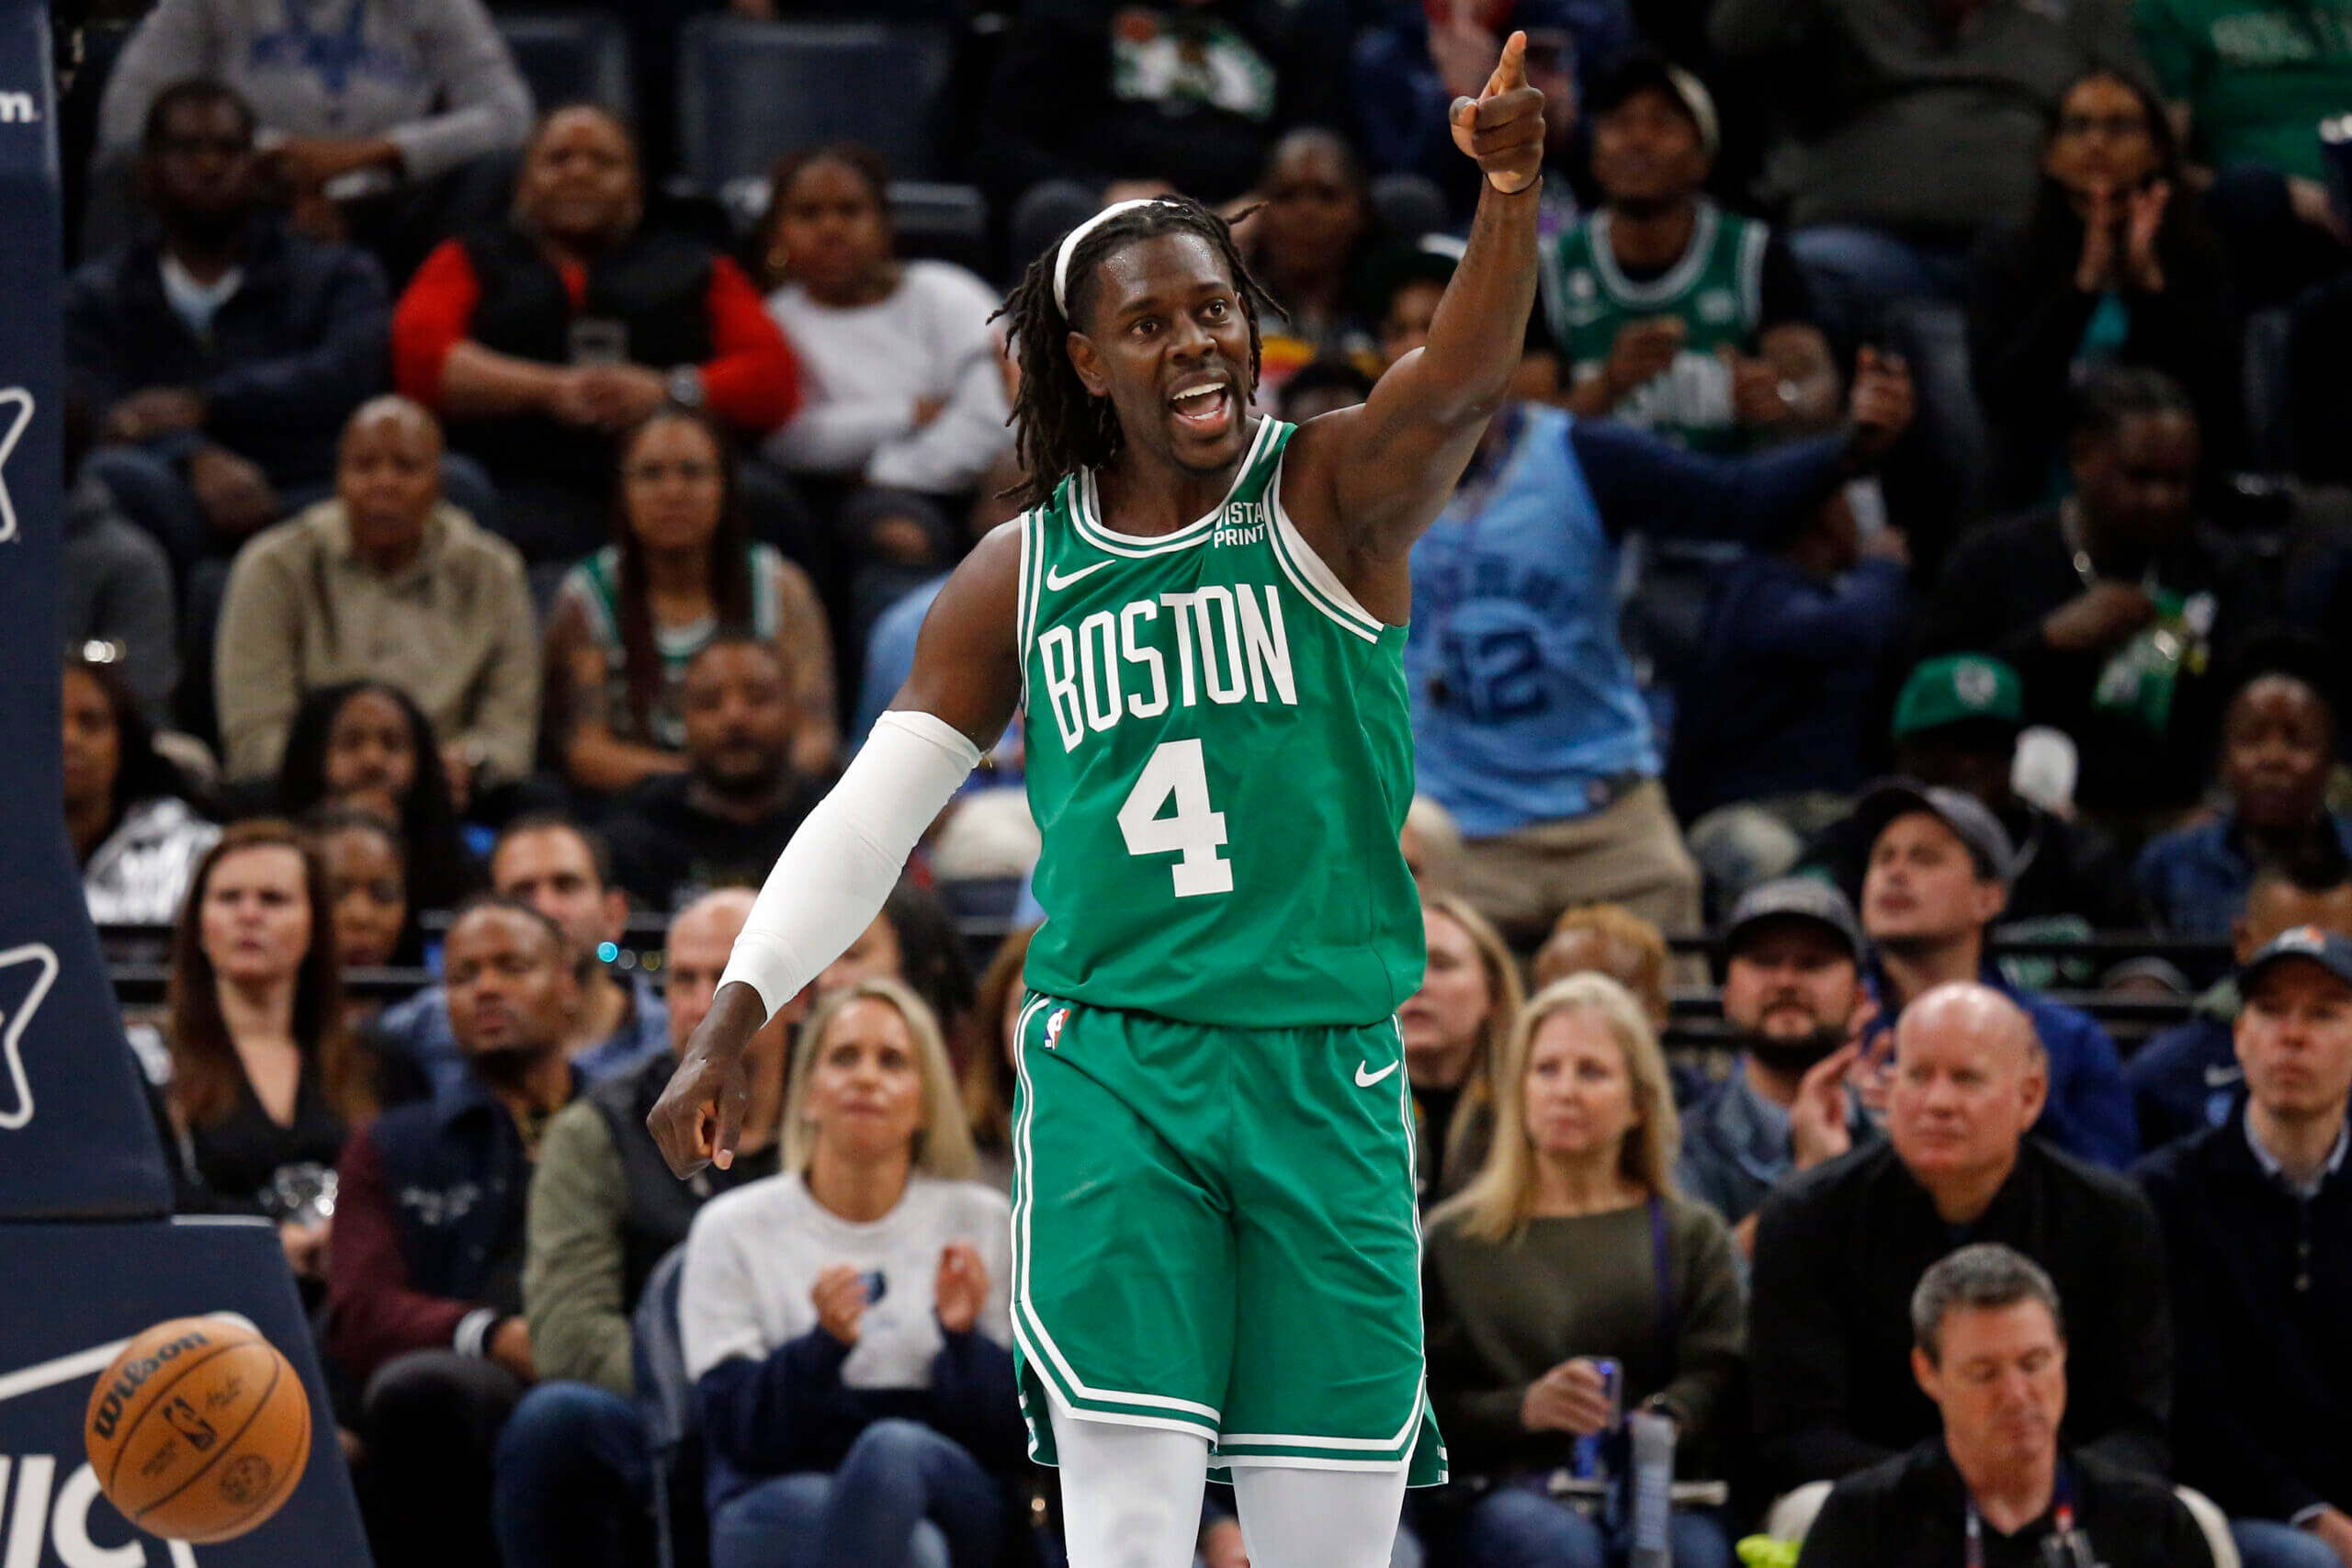 How Jrue Holiday is finding new ways to “raise hell” on defense for the Celtics